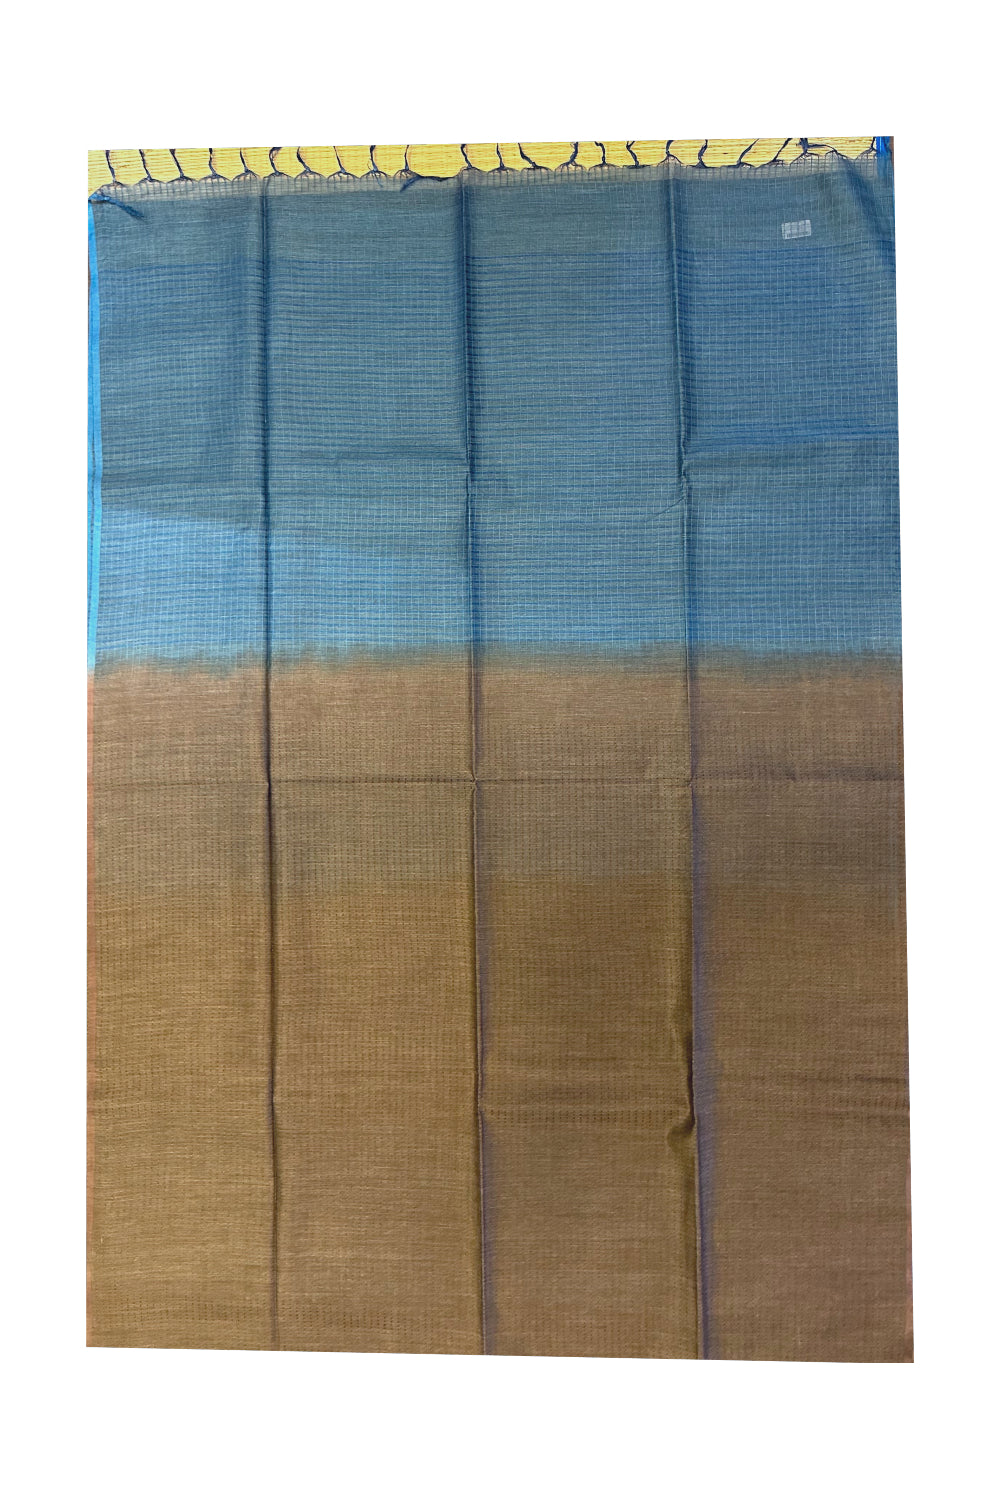 Southloom Tussar Saree with Blue Pallu and Brown Body